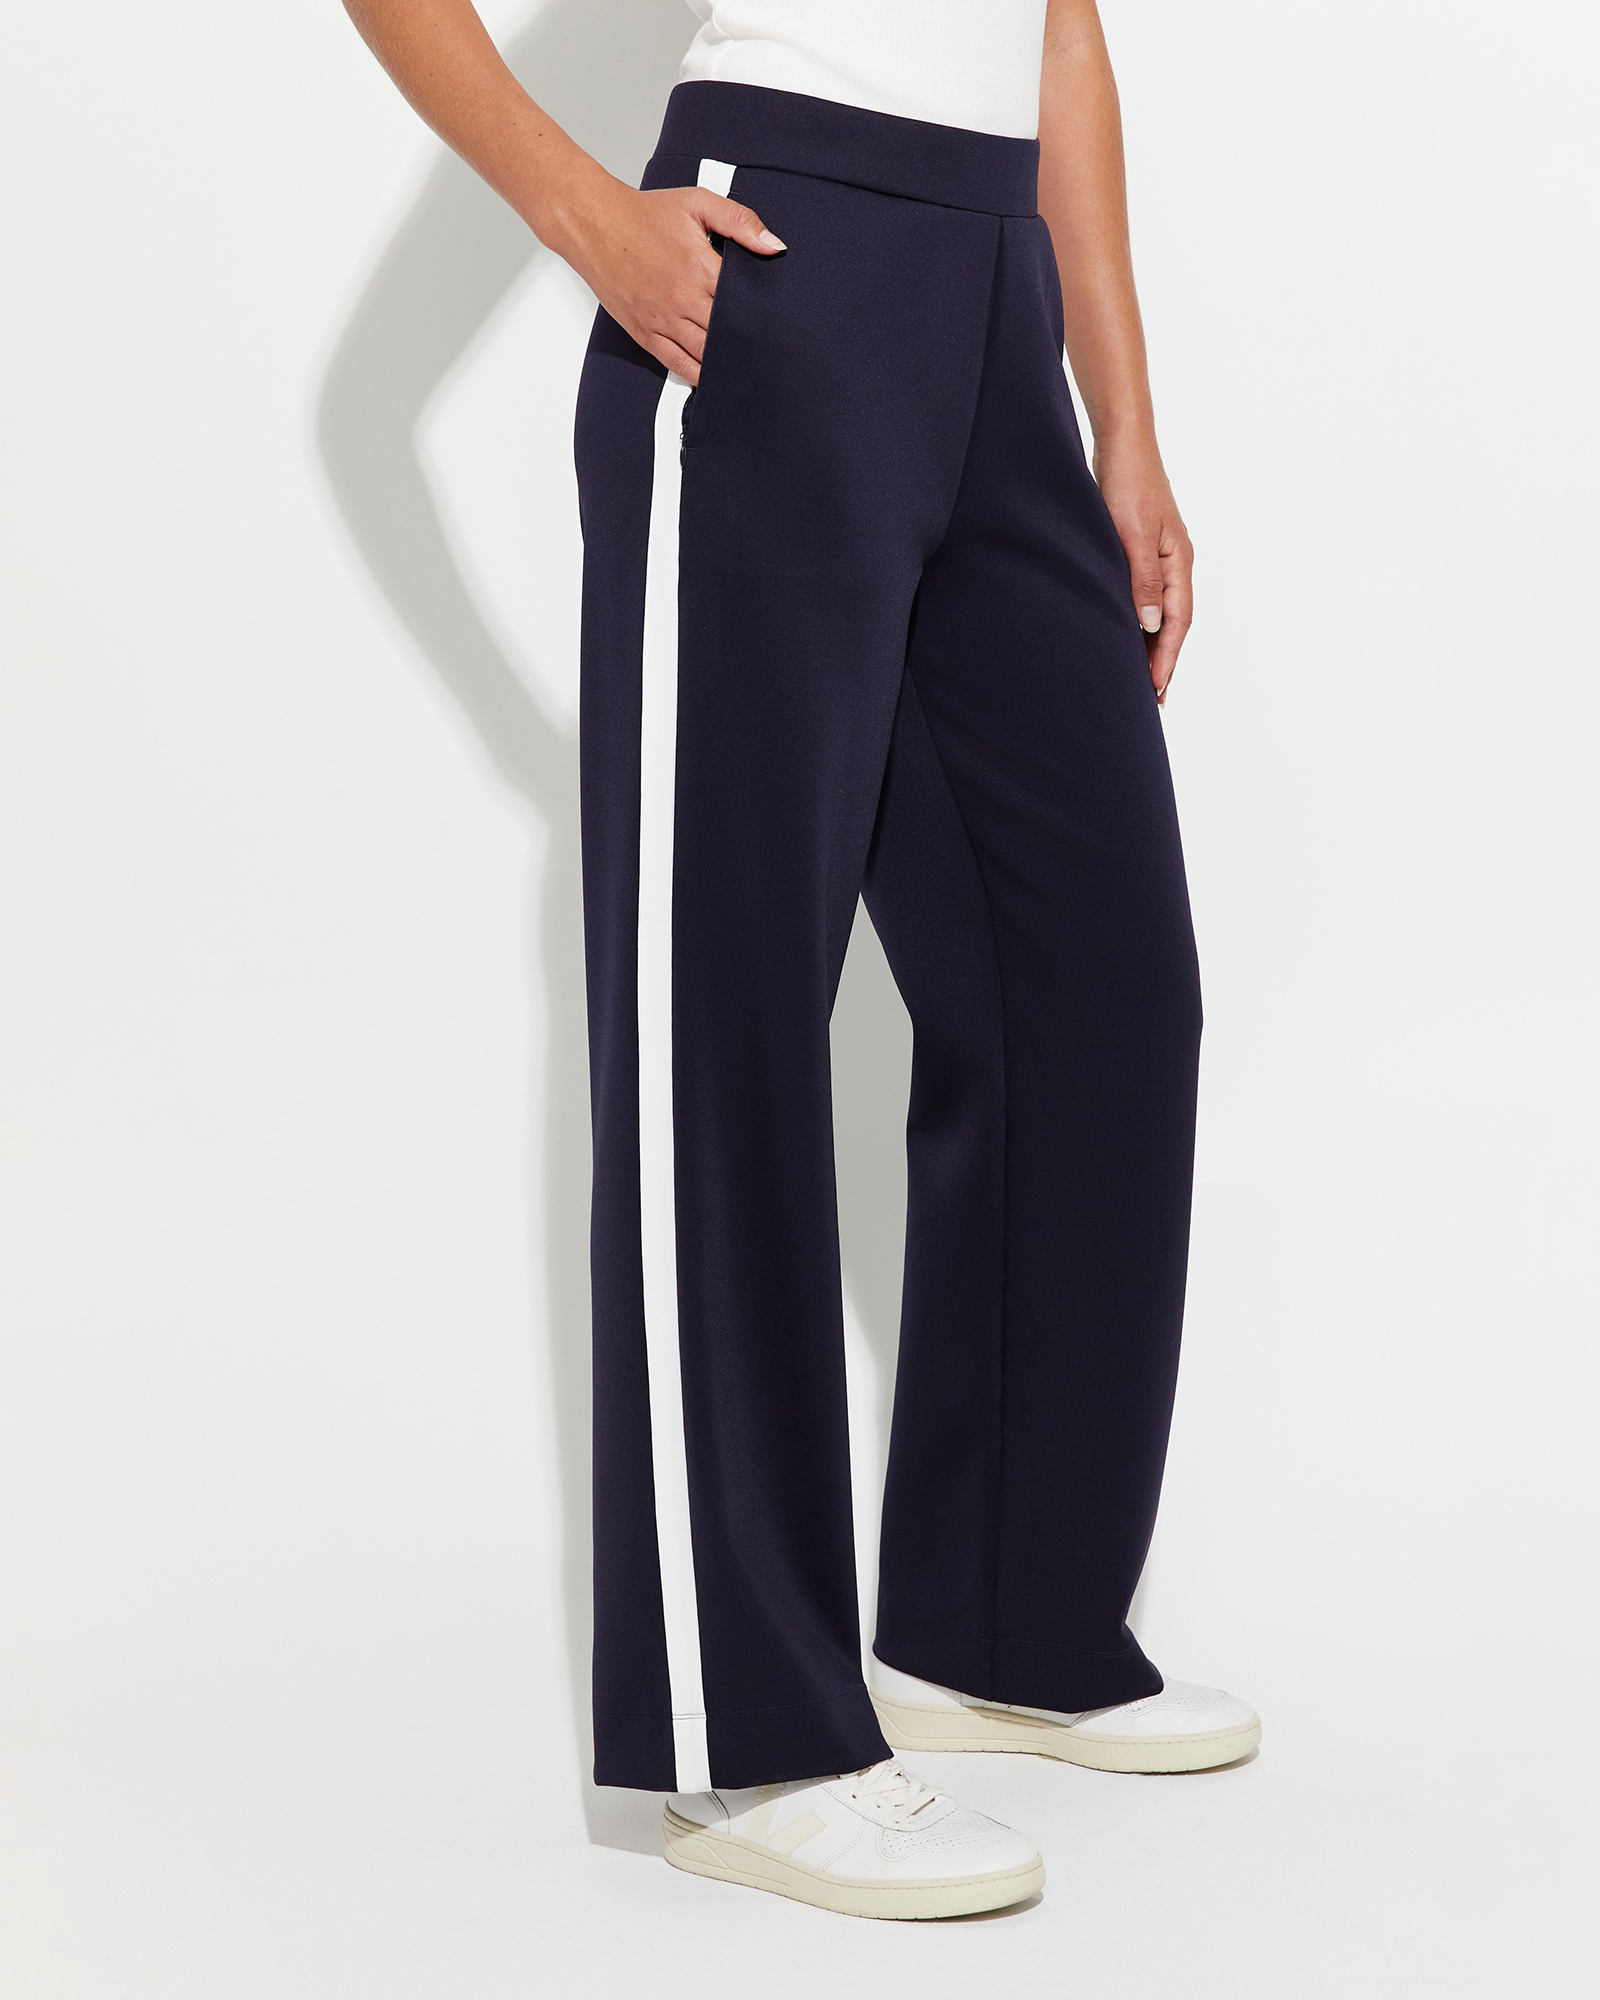 First Sport  Microfibre Track Pants (FS2124) - Sports & Games